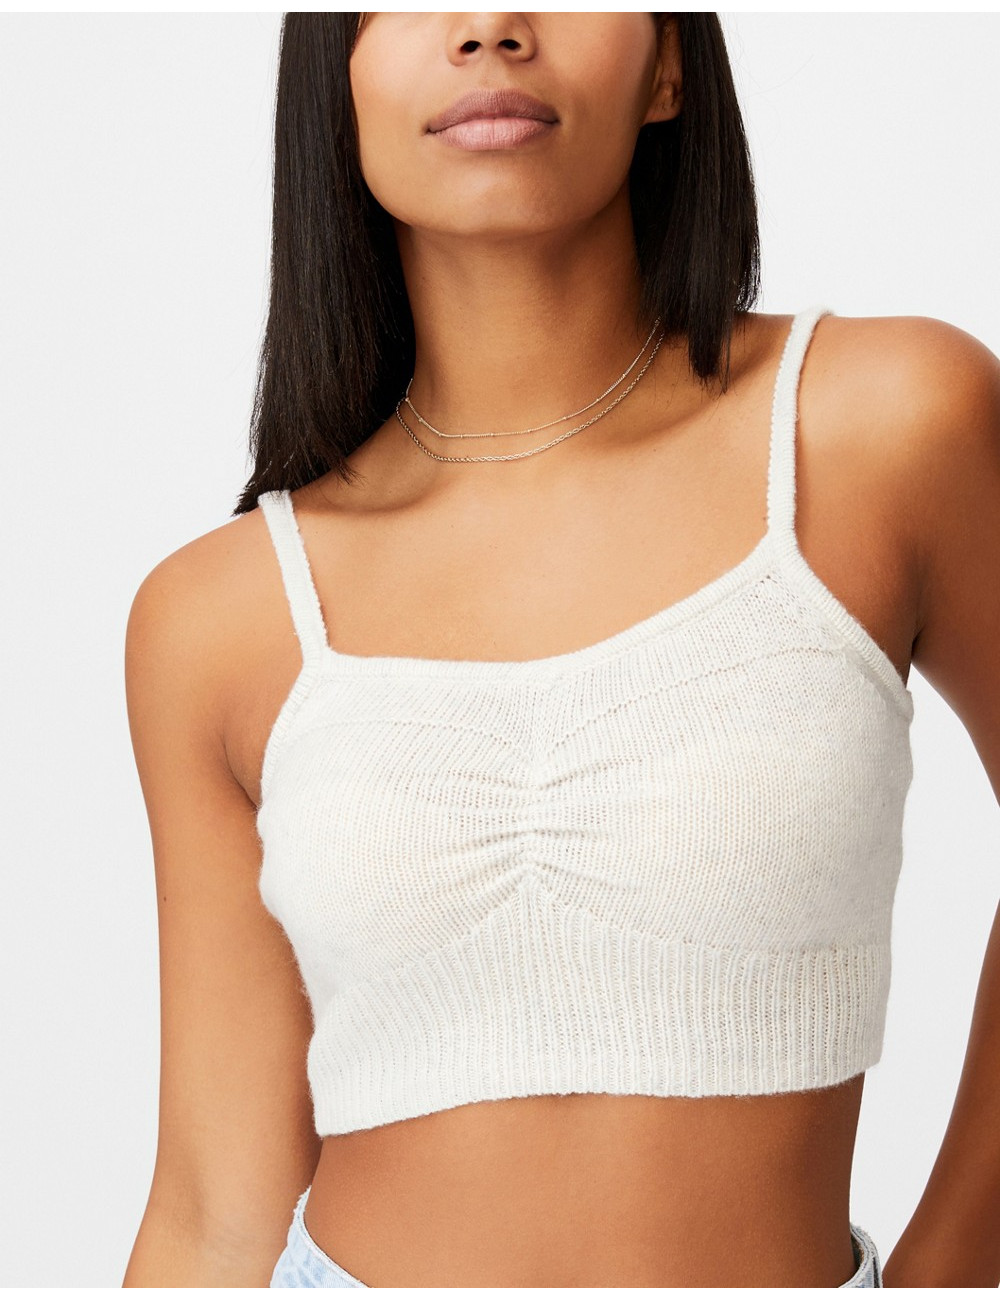 Cotton:On baby rib cami in...